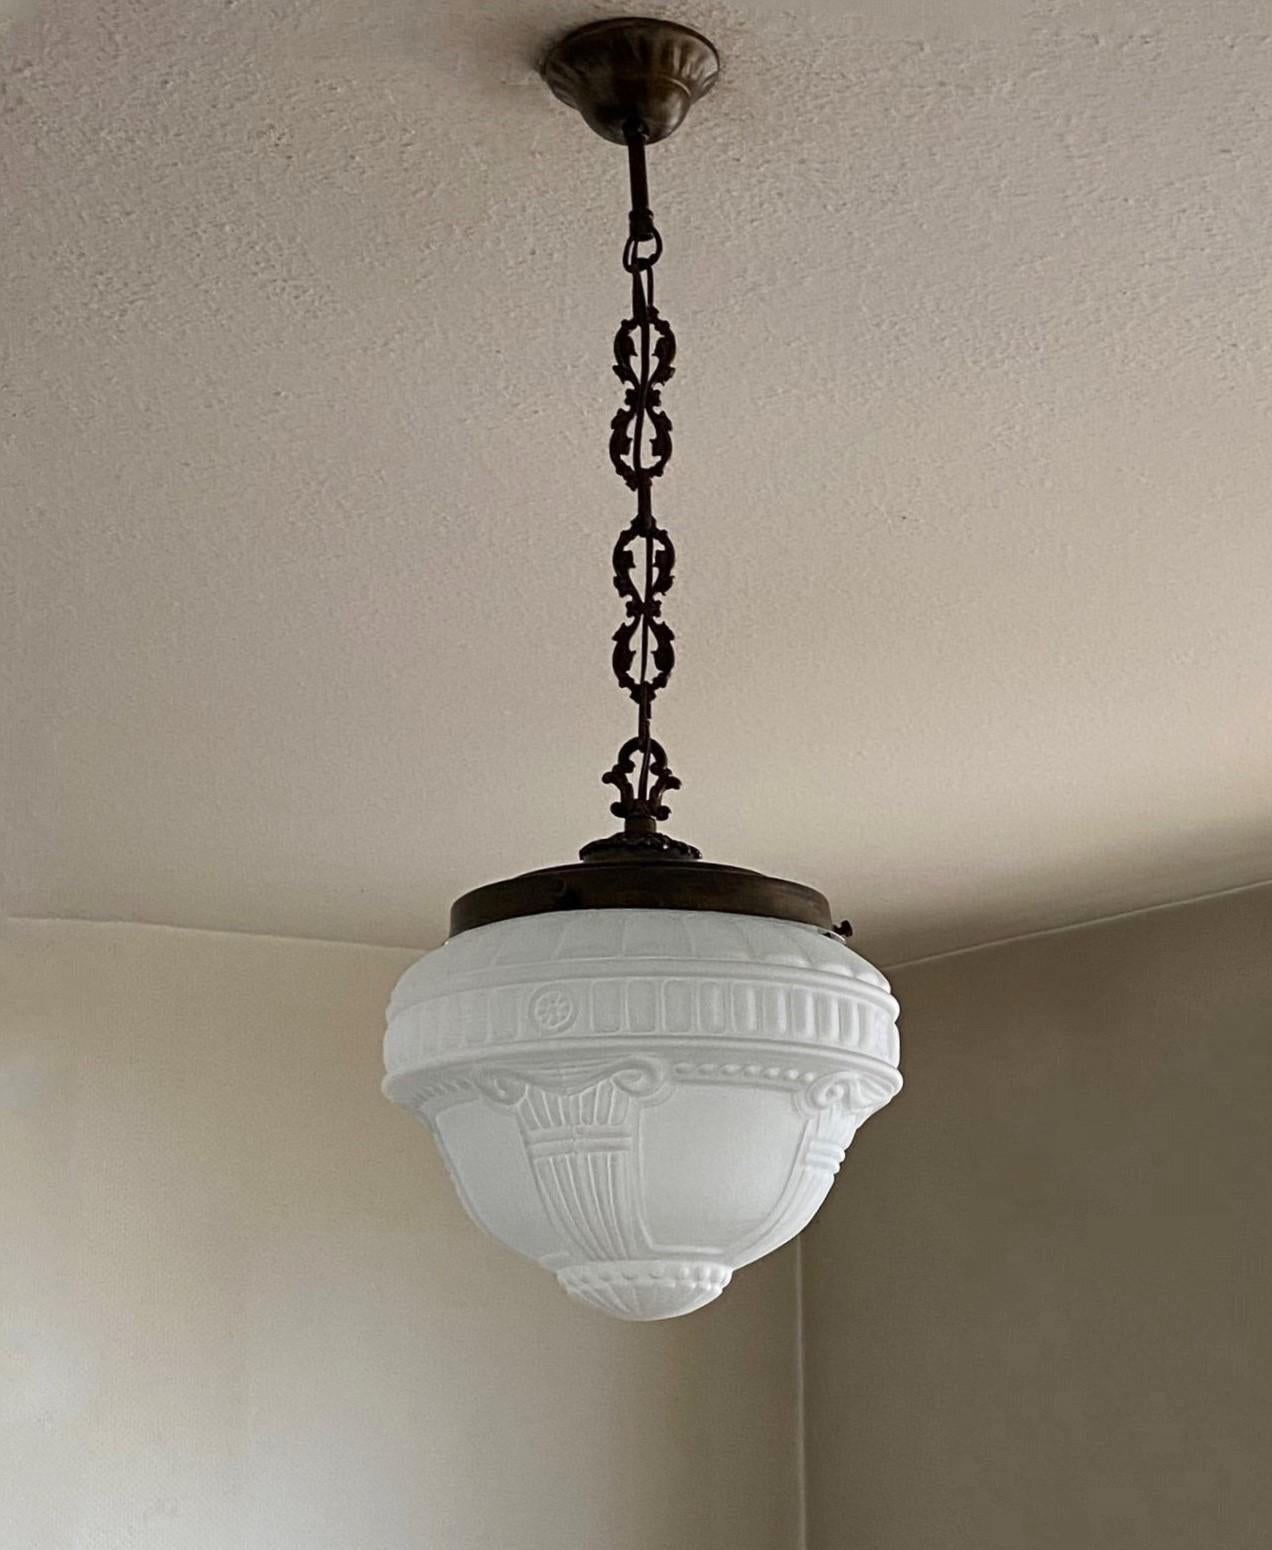 An elegant Art Deco high relief glass pendant, light fixture, France 1930-1939, frosted glass globe with beautiful detailing, patinated brass mounts. In Fine vintage condition, glass without damages, newly rewired. It takes 1 Edison E27 screw bulb